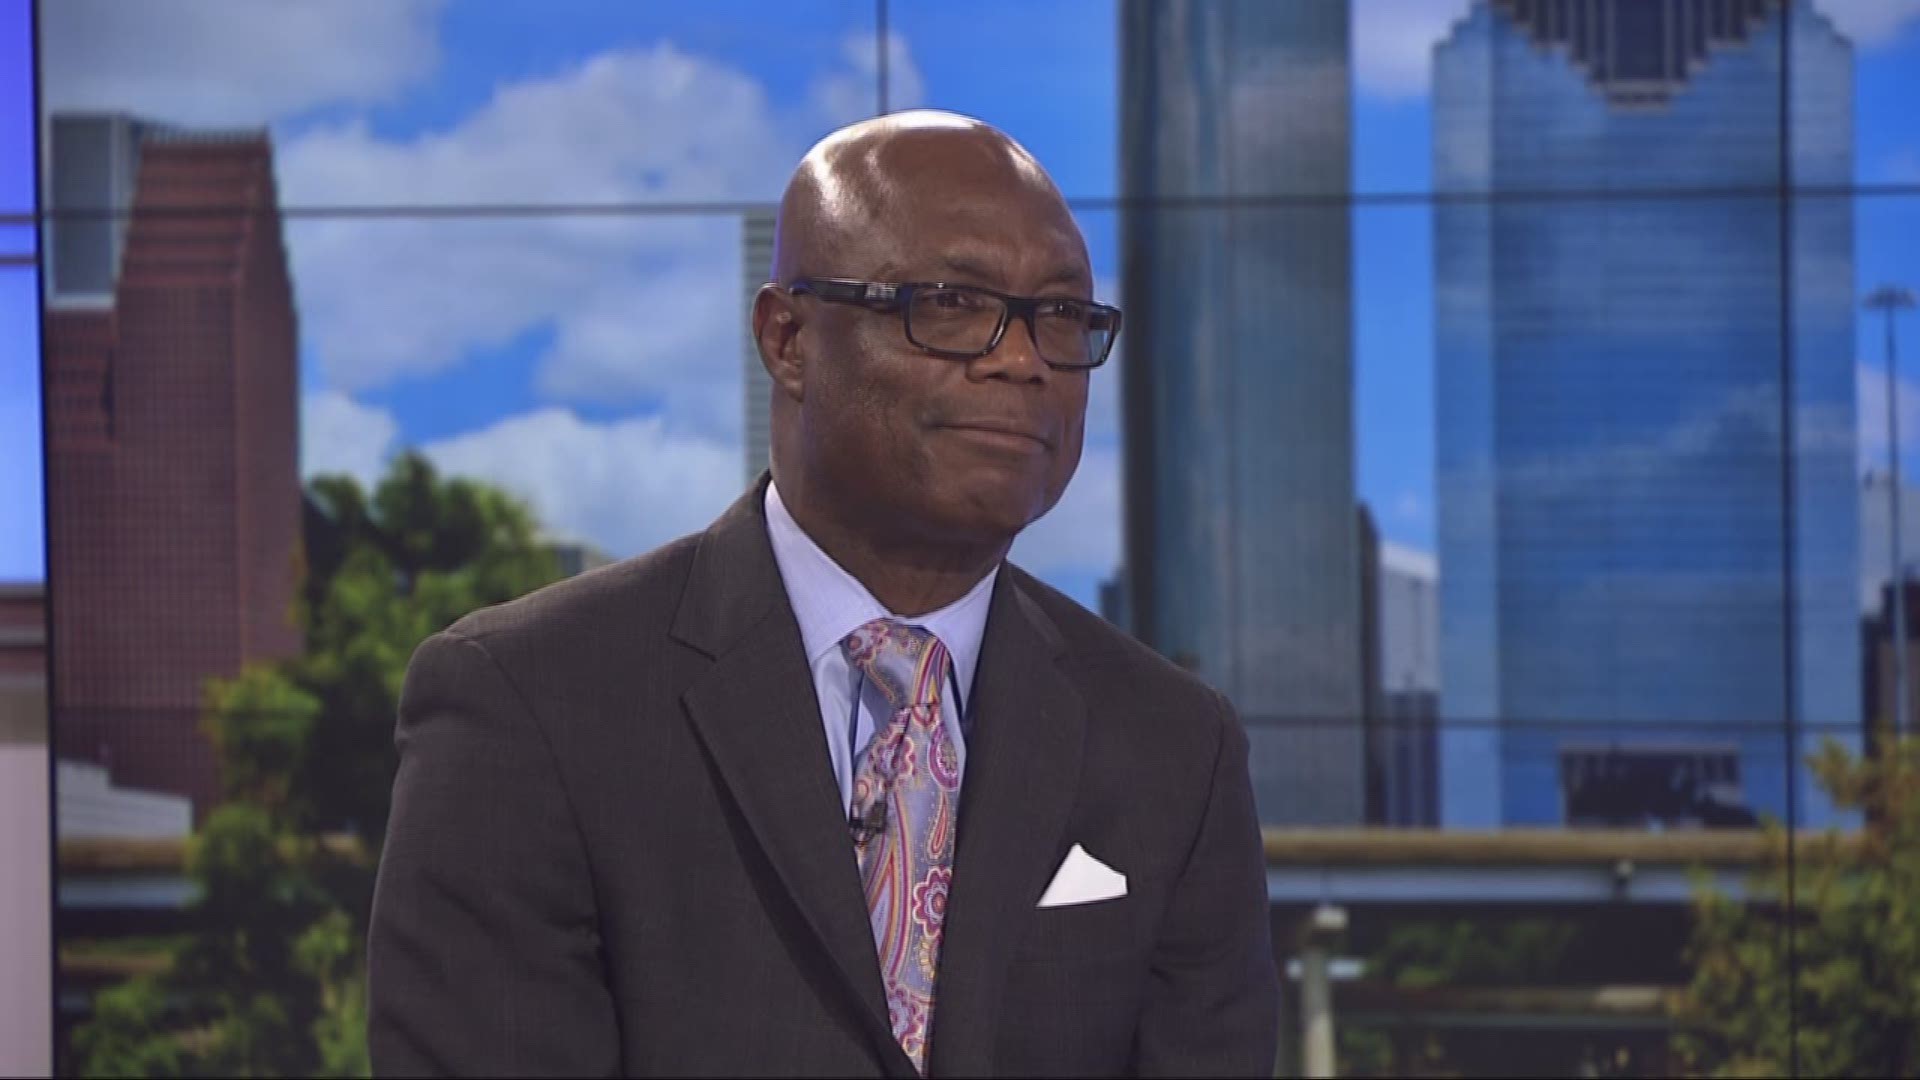 Bishop James Dixon, with the Community of Faith, talks about the importance of Houstonians coming together as one in light of the deadly attack in Charlottesville. Bishop Dixon is hosting a town hall Monday night at 1024 Pinemont Drive in Houston.